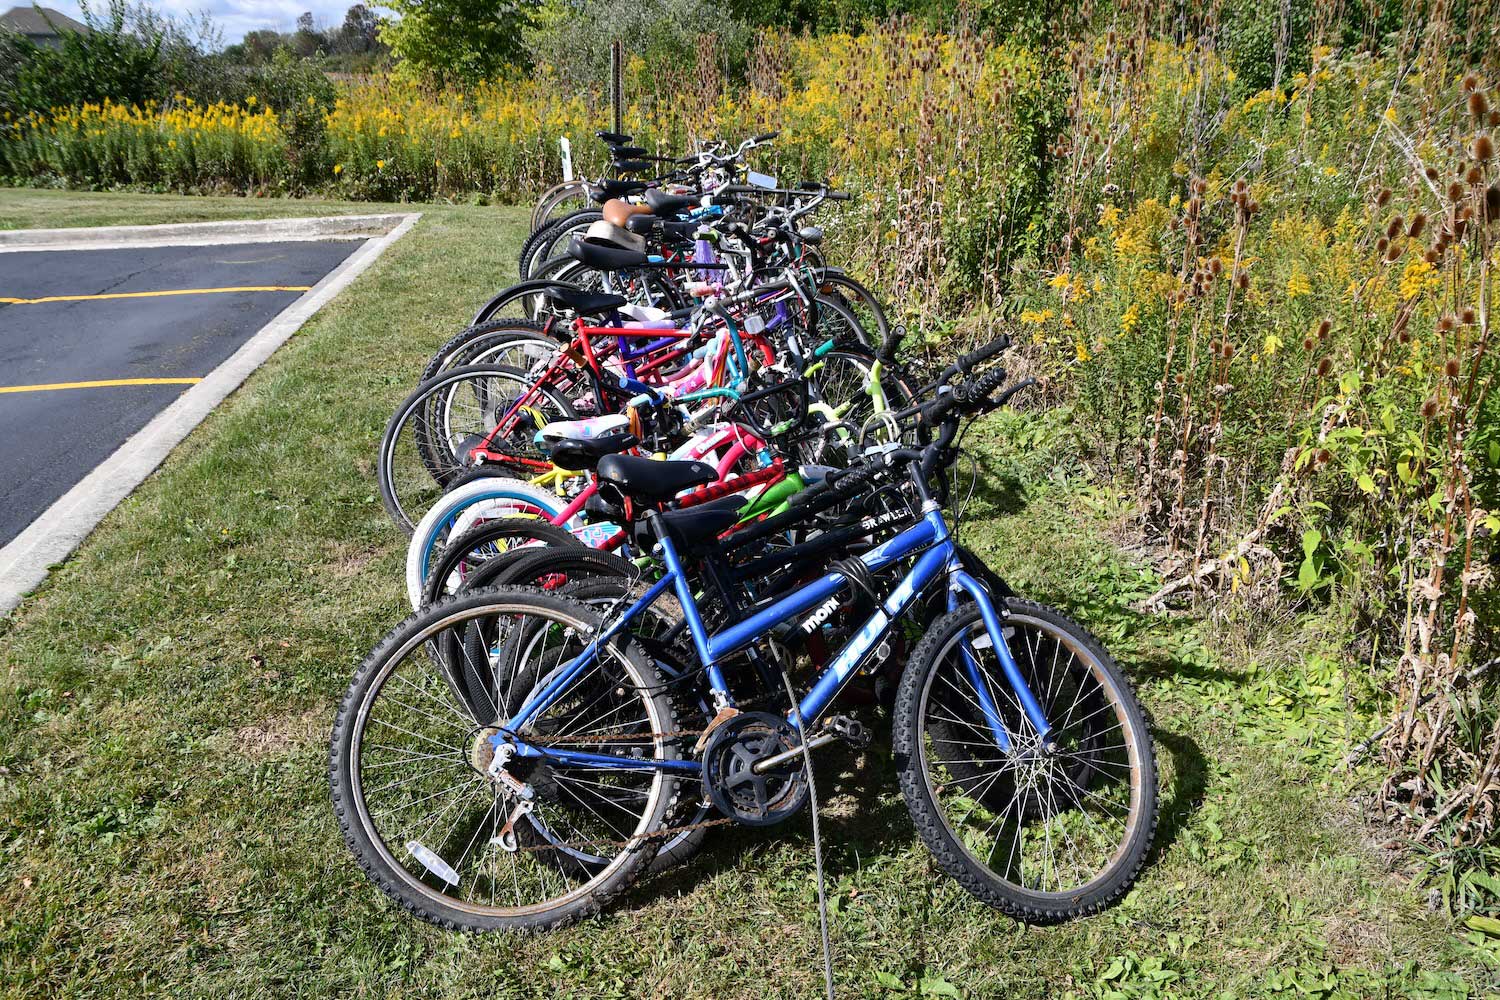 Bikes lined up in the grass next to a parking lot.